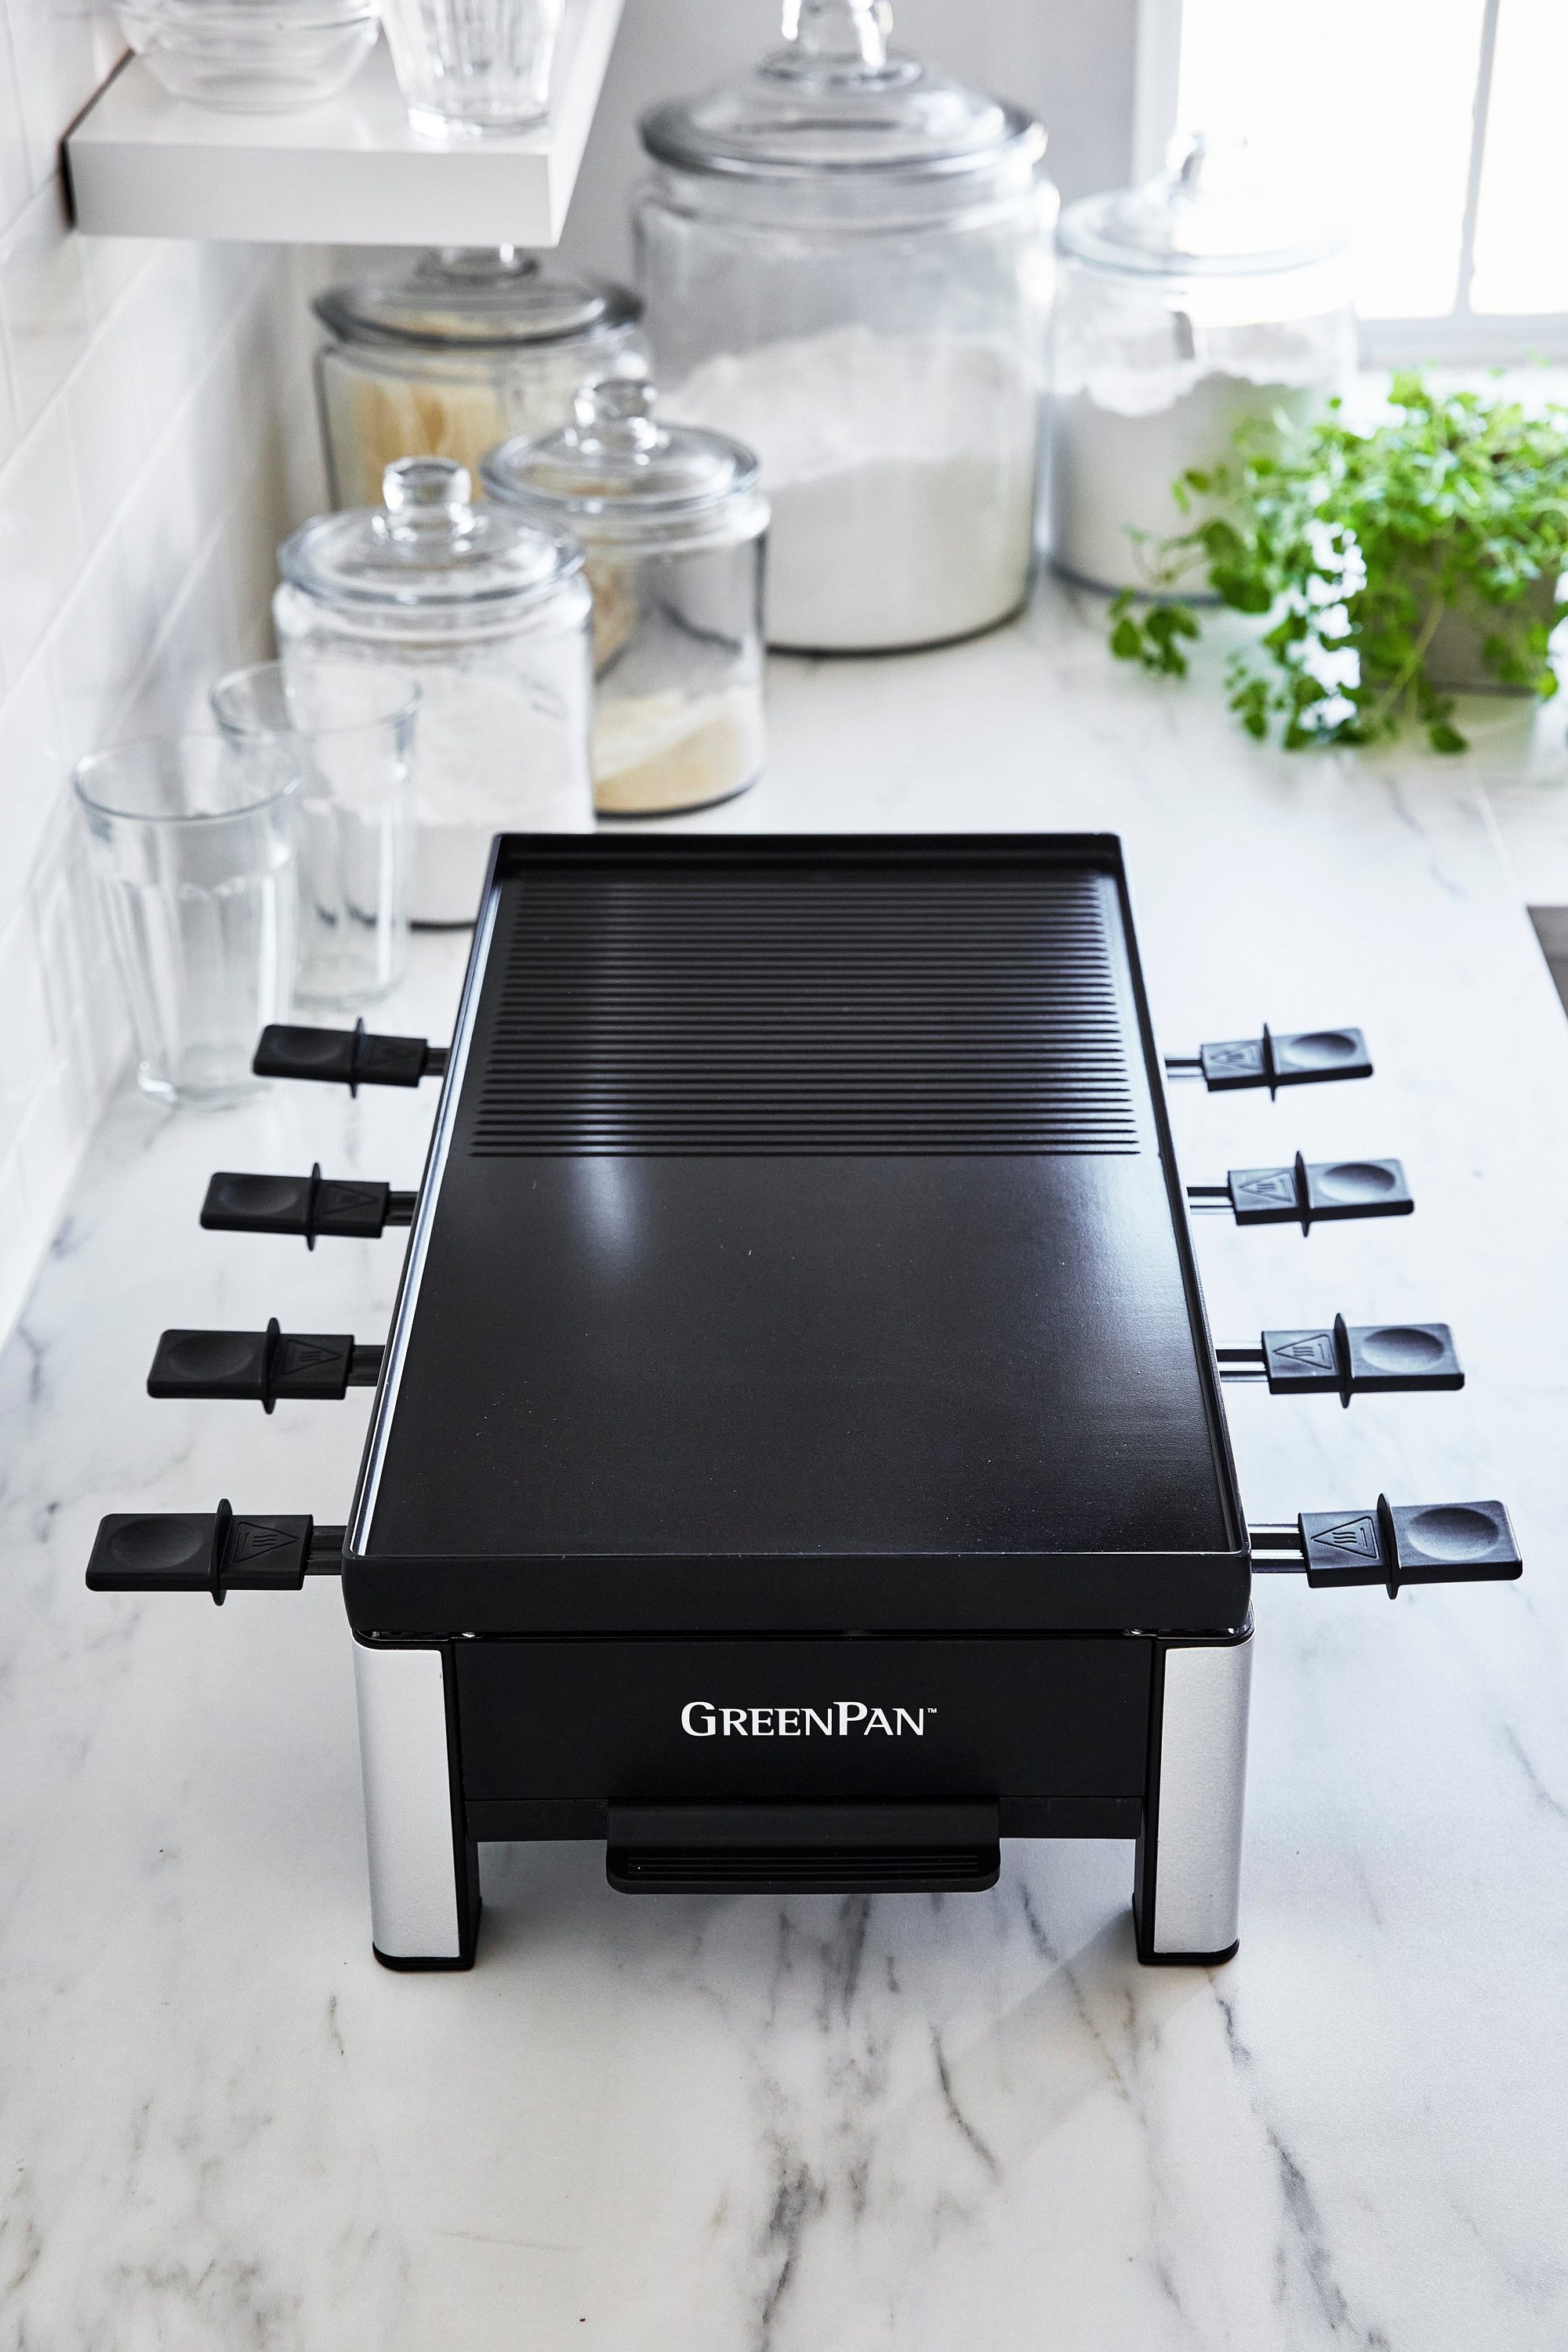 The New Chop & Grill Line From GreenPan Is, Well, Sharp - The